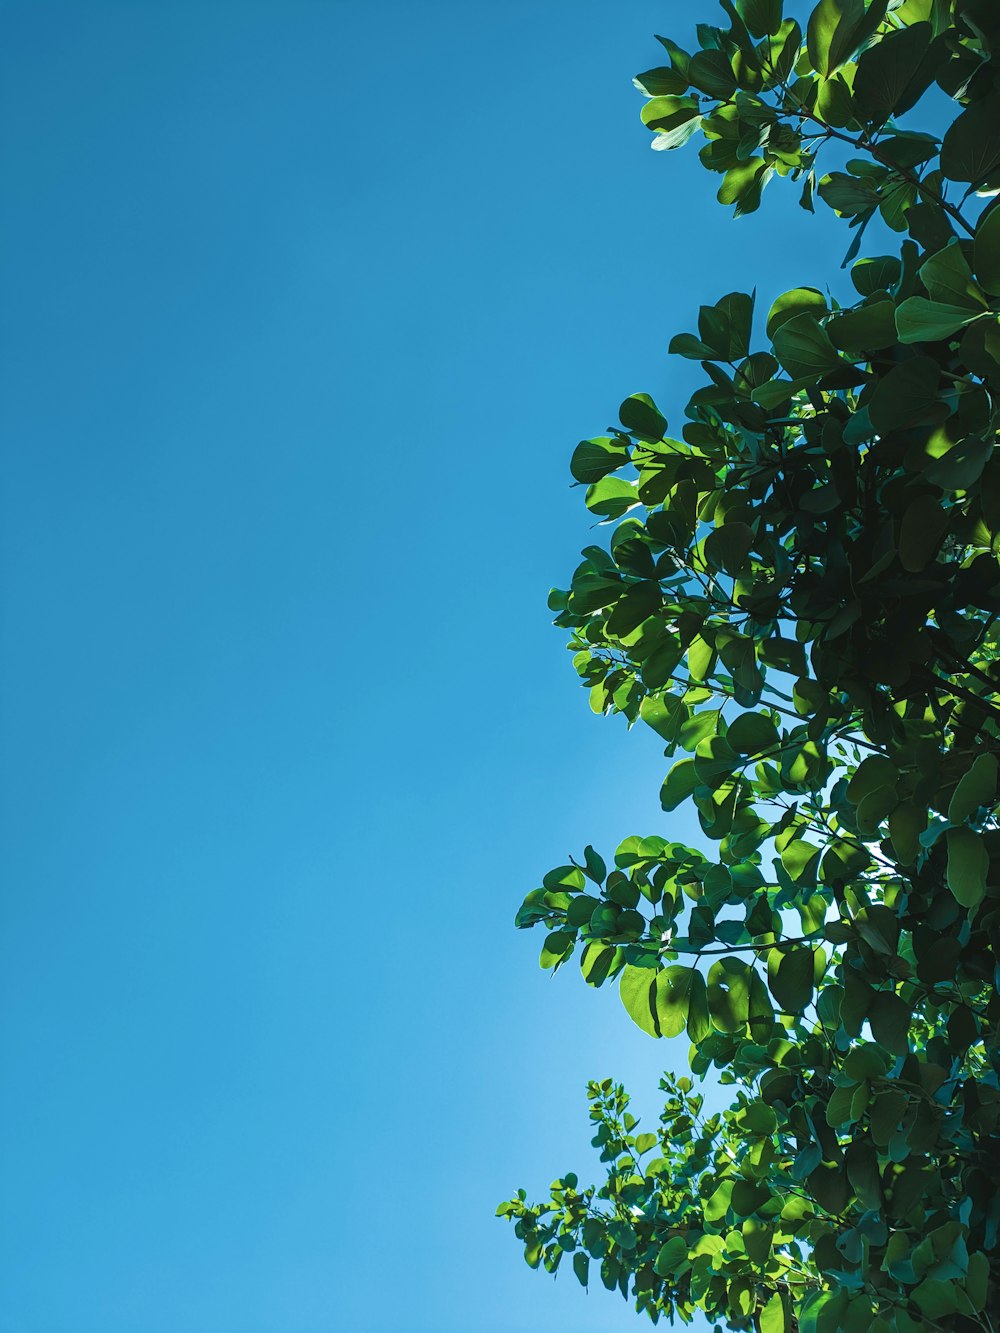 a blue sky and some green leaves on a tree